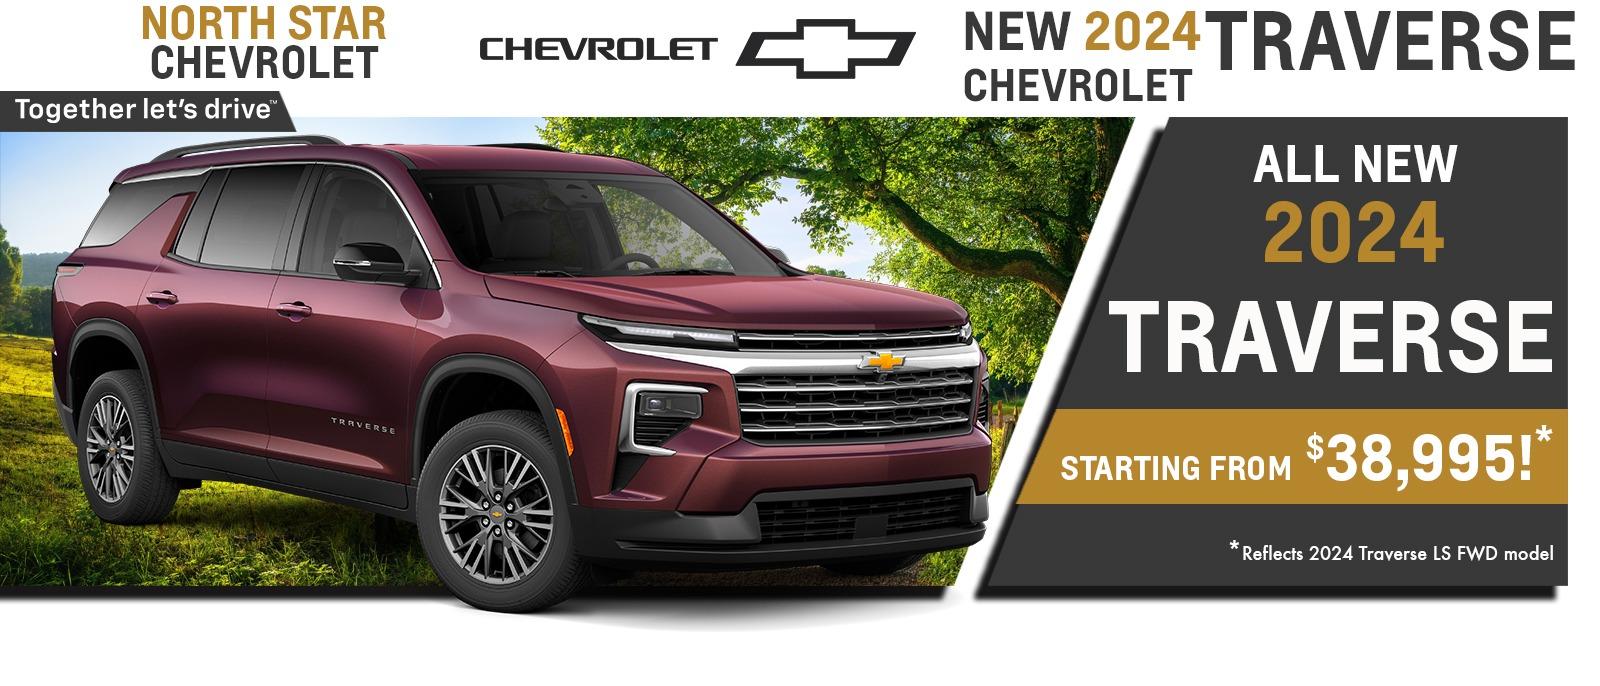 2024 Chevrolet Travers Starting at $38,995